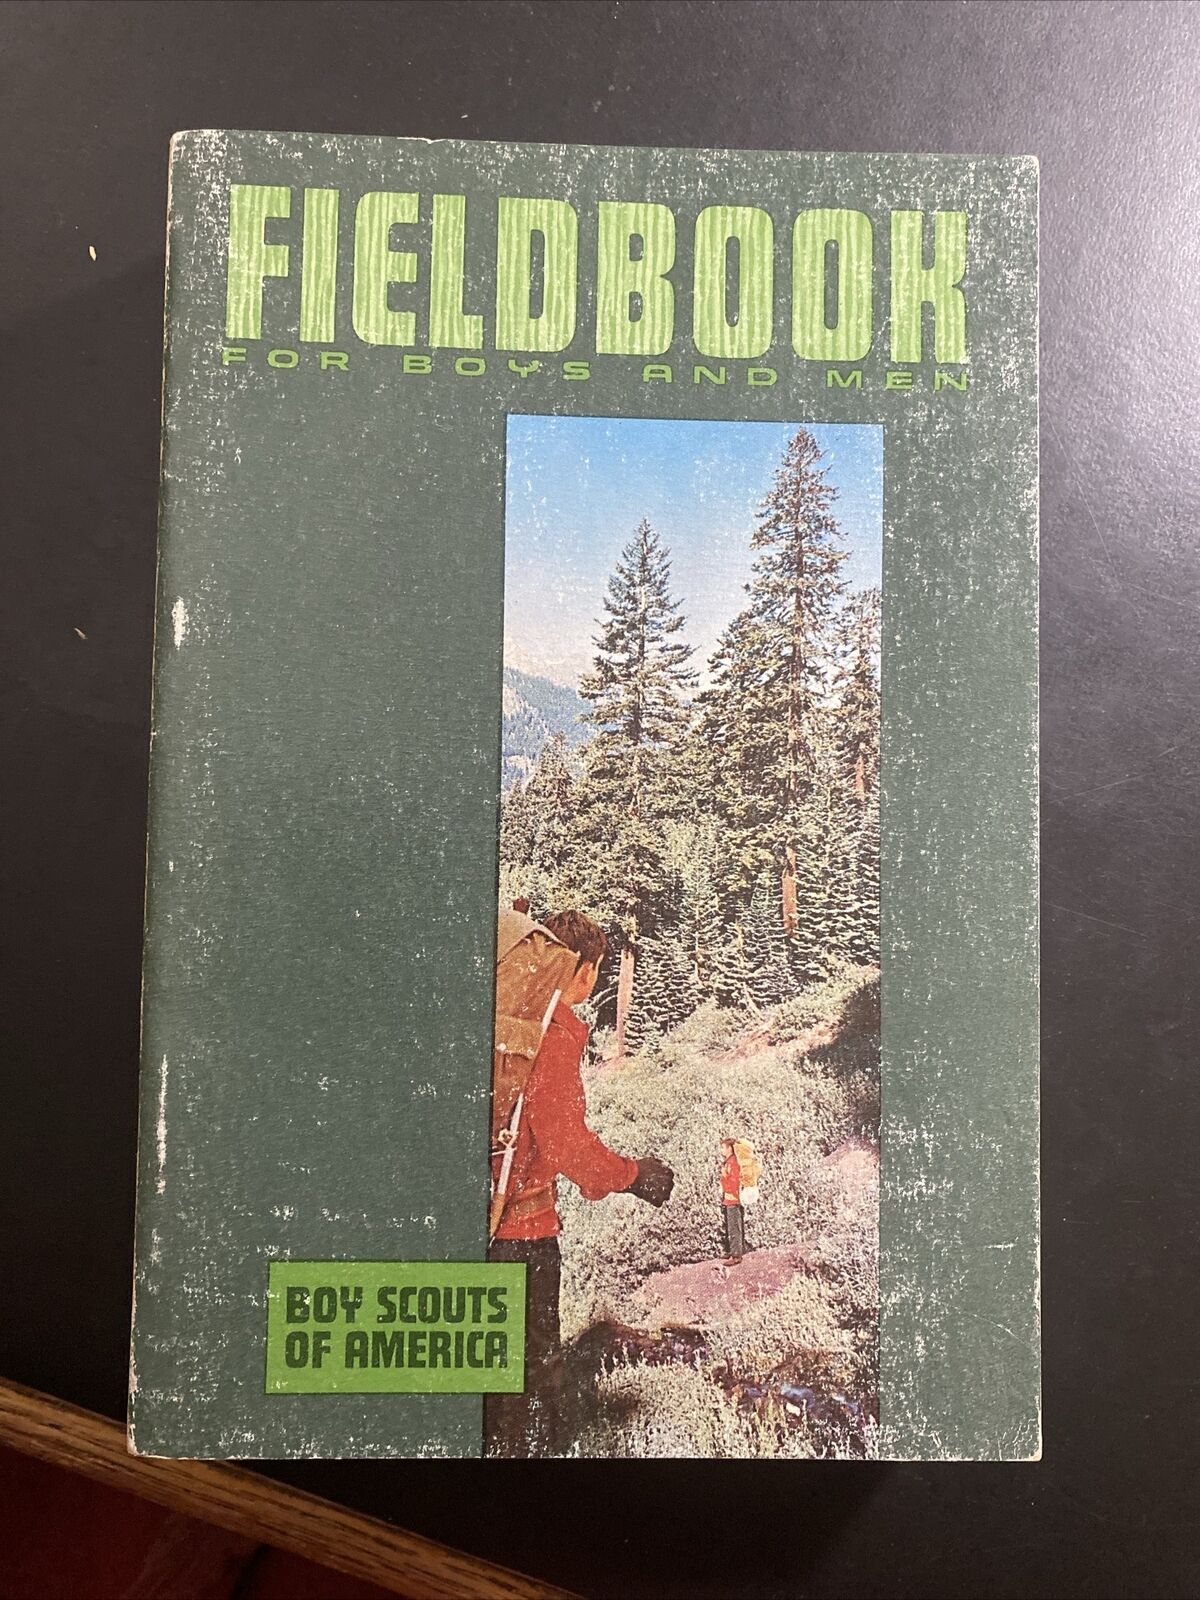 FieldBook for Boys and Men 1967/1969 Printing Boy Scouts of America BSA Outdoors